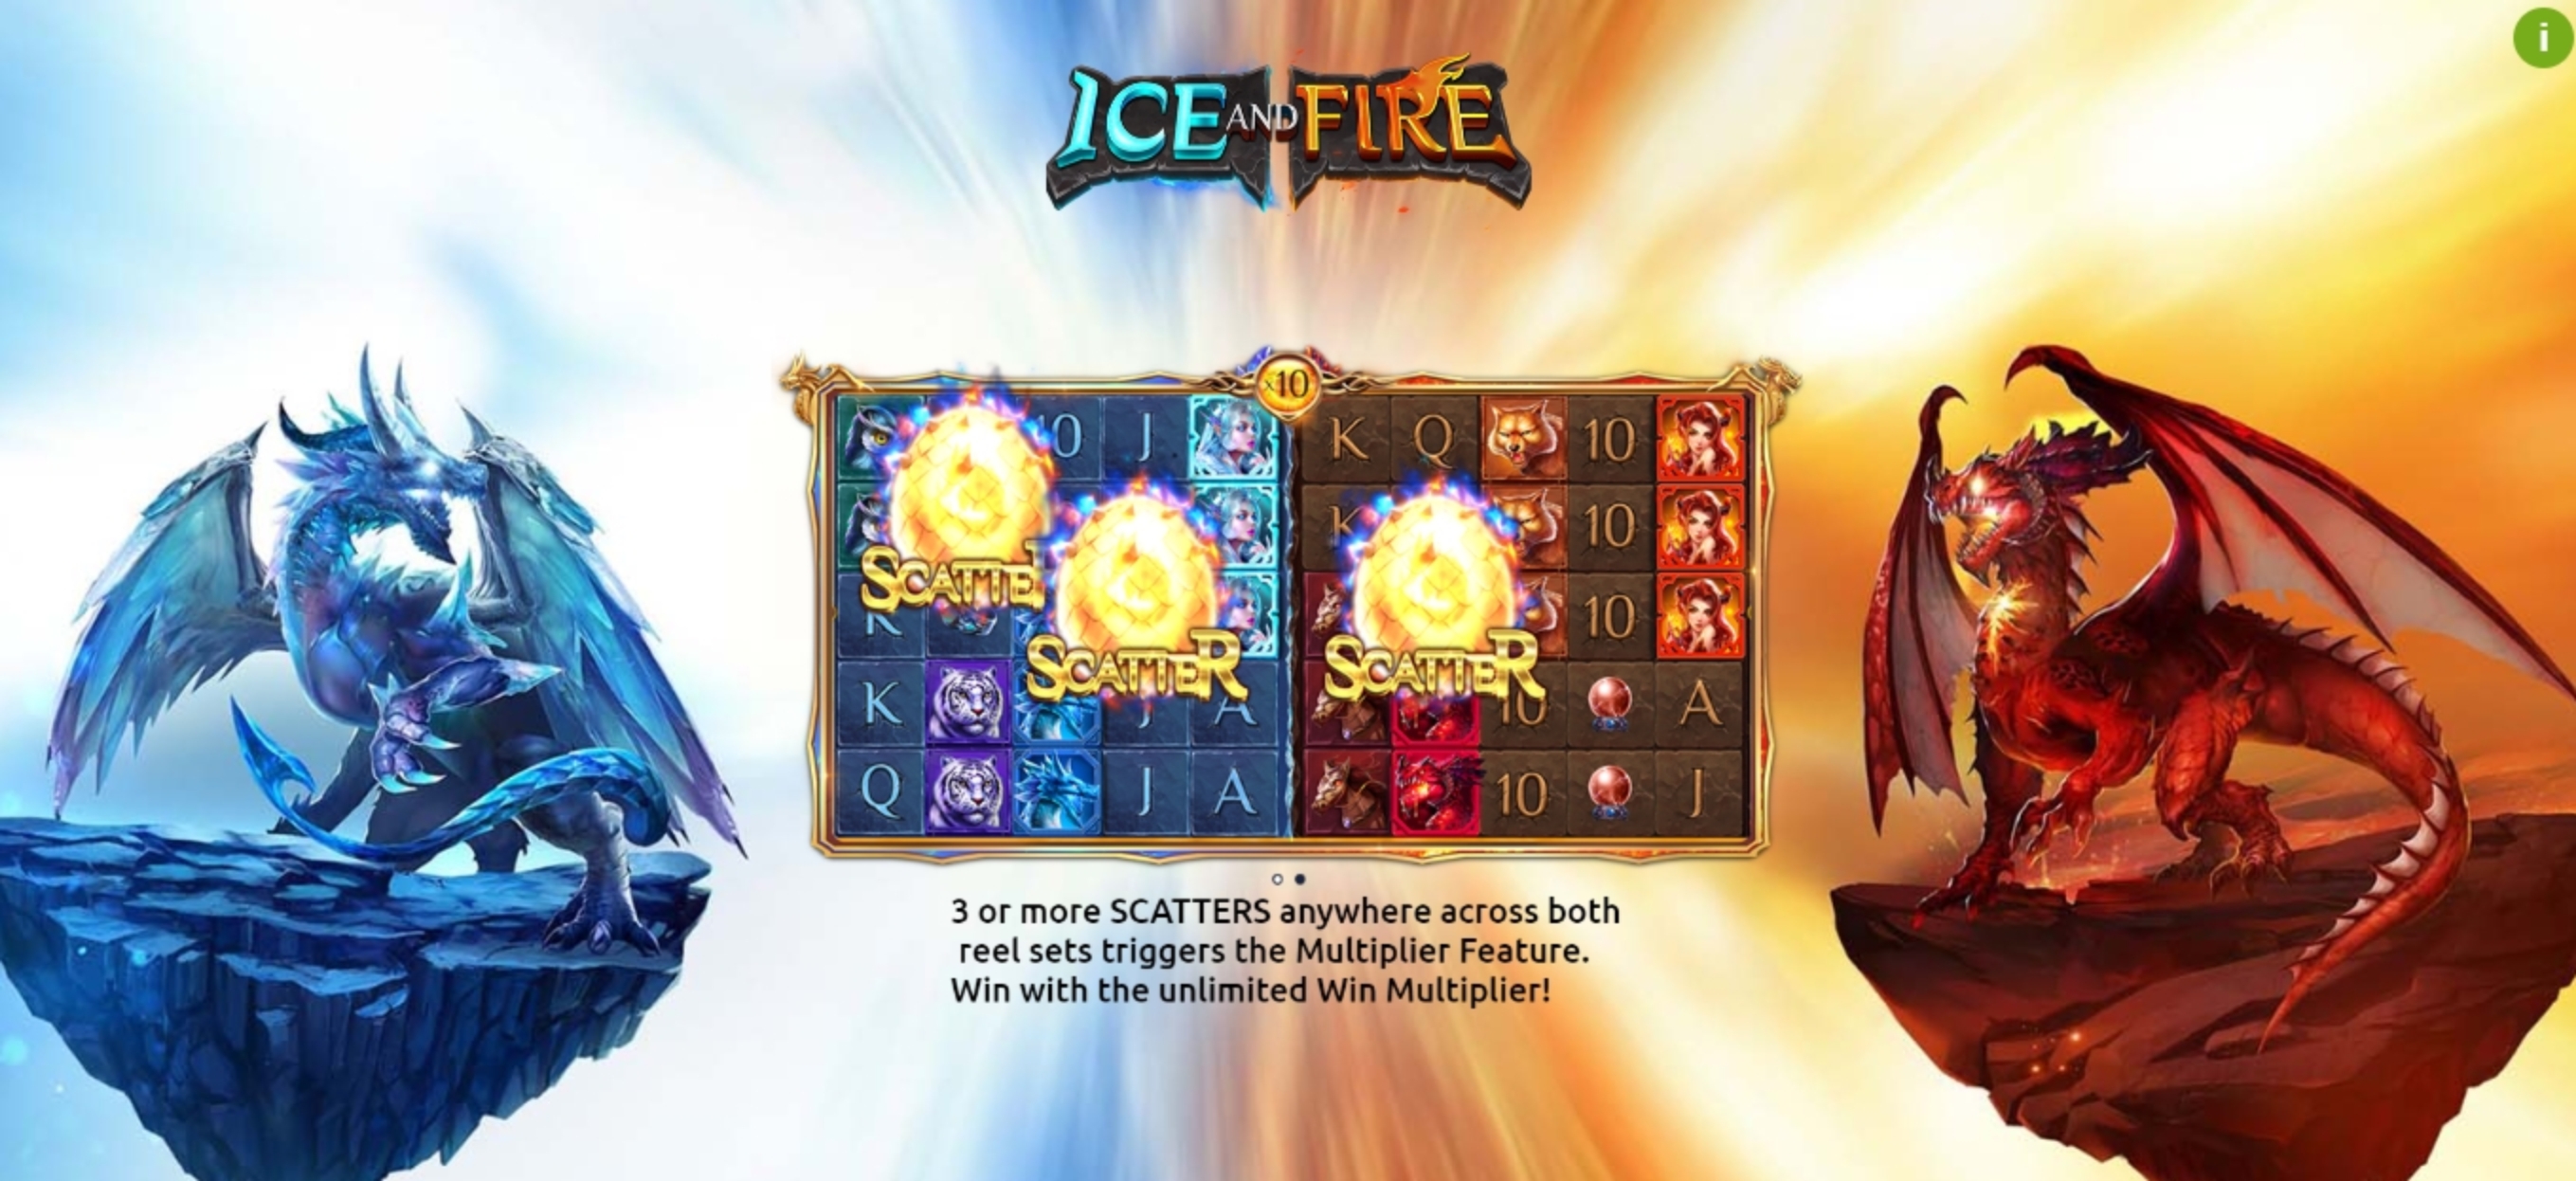 Play Ice and Fire Free Casino Slot Game by Dream Tech